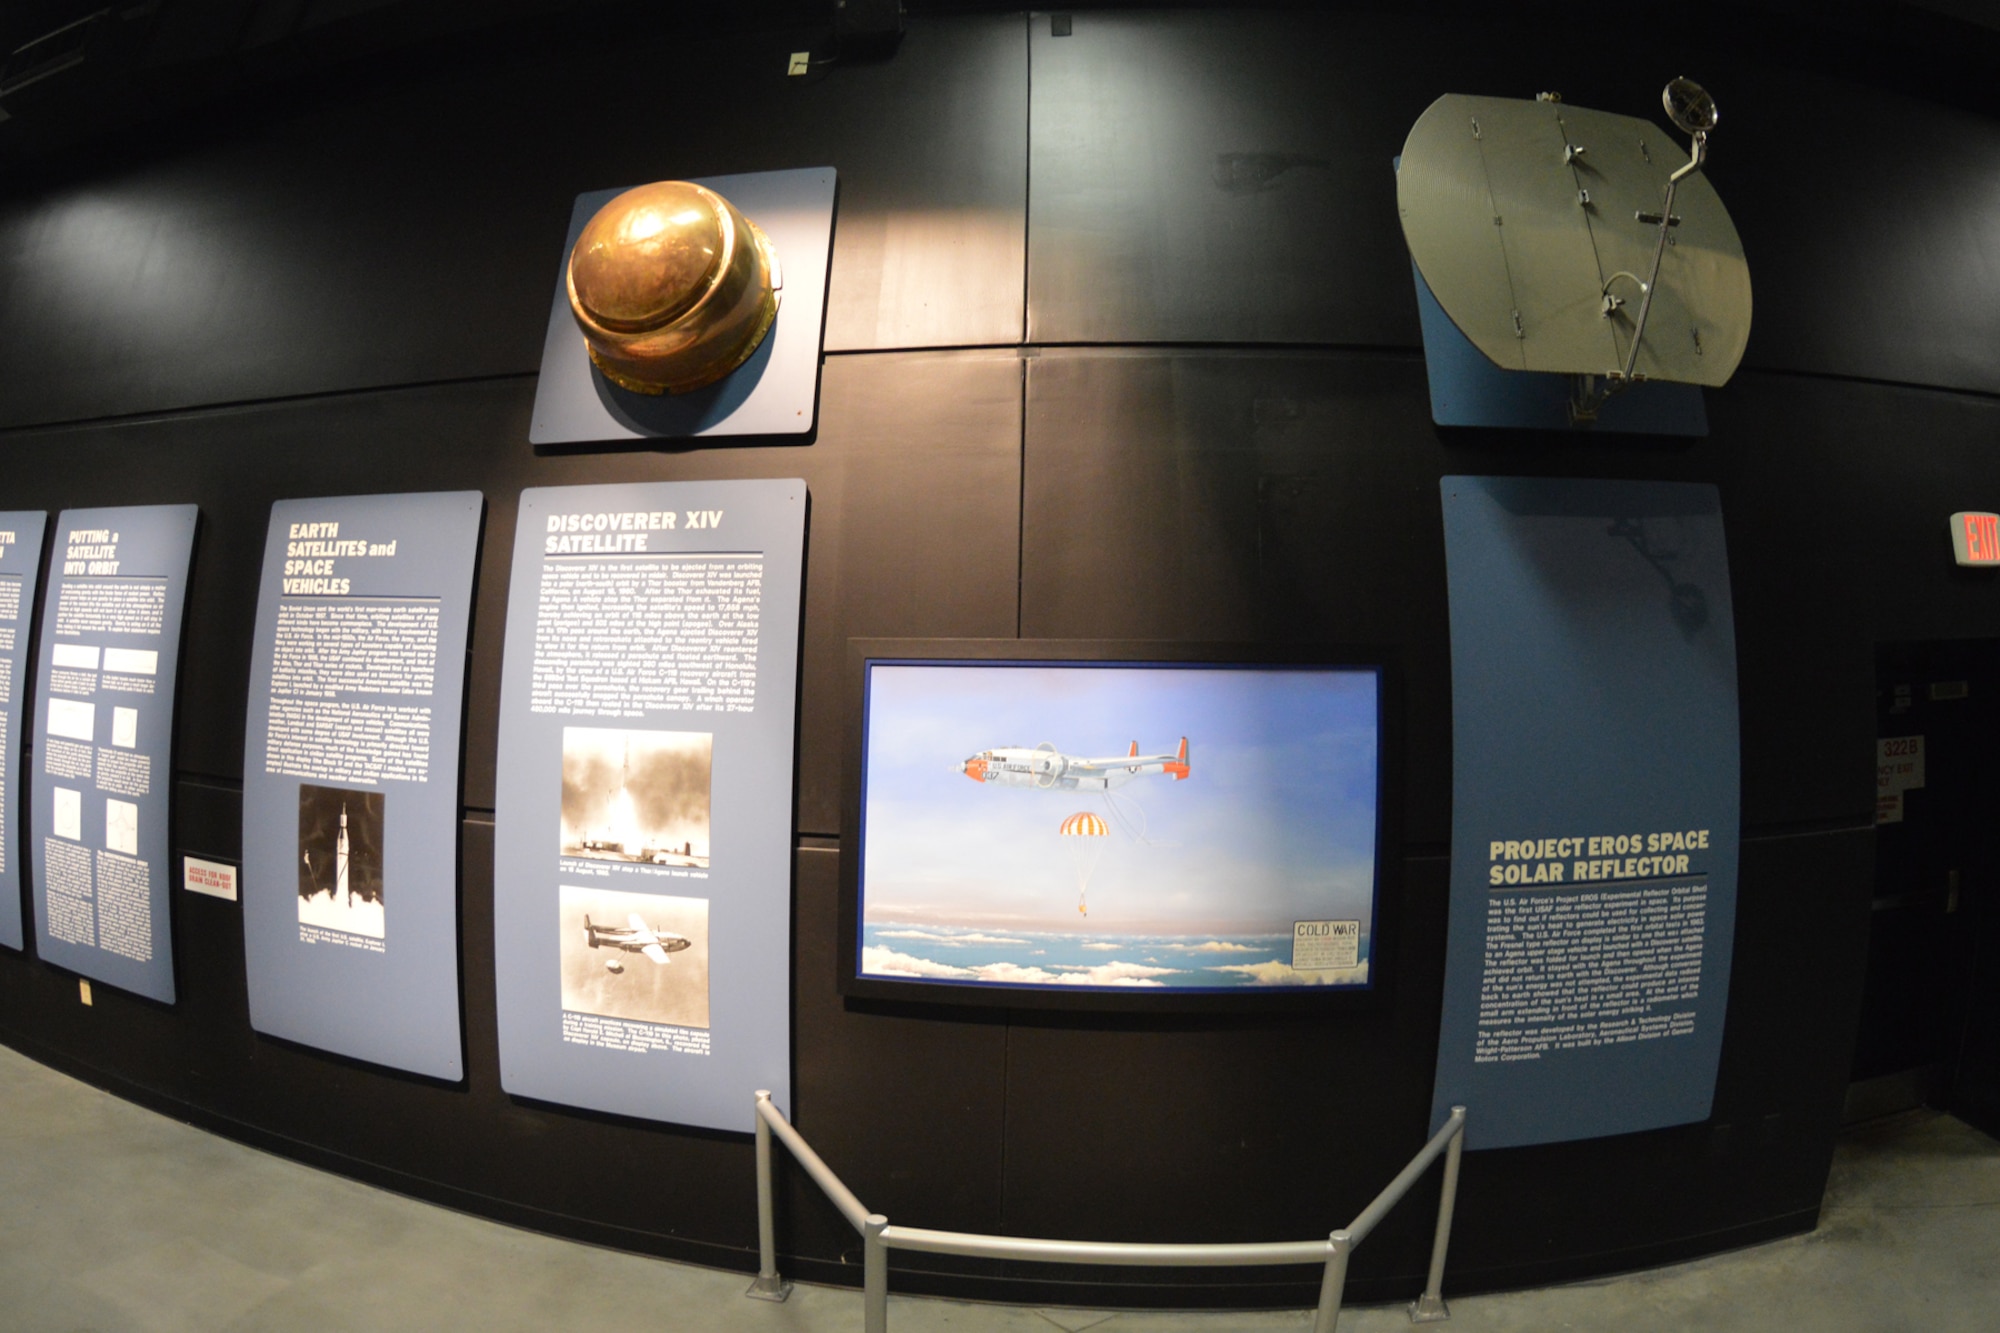 DAYTON, Ohio -- Portion of the Discoverer XIV satellite, and  Project EROS space solar reflector in the Missile and Space Gallery at the National Museum of the United States Air Force. (U.S. Air Force photo) 
